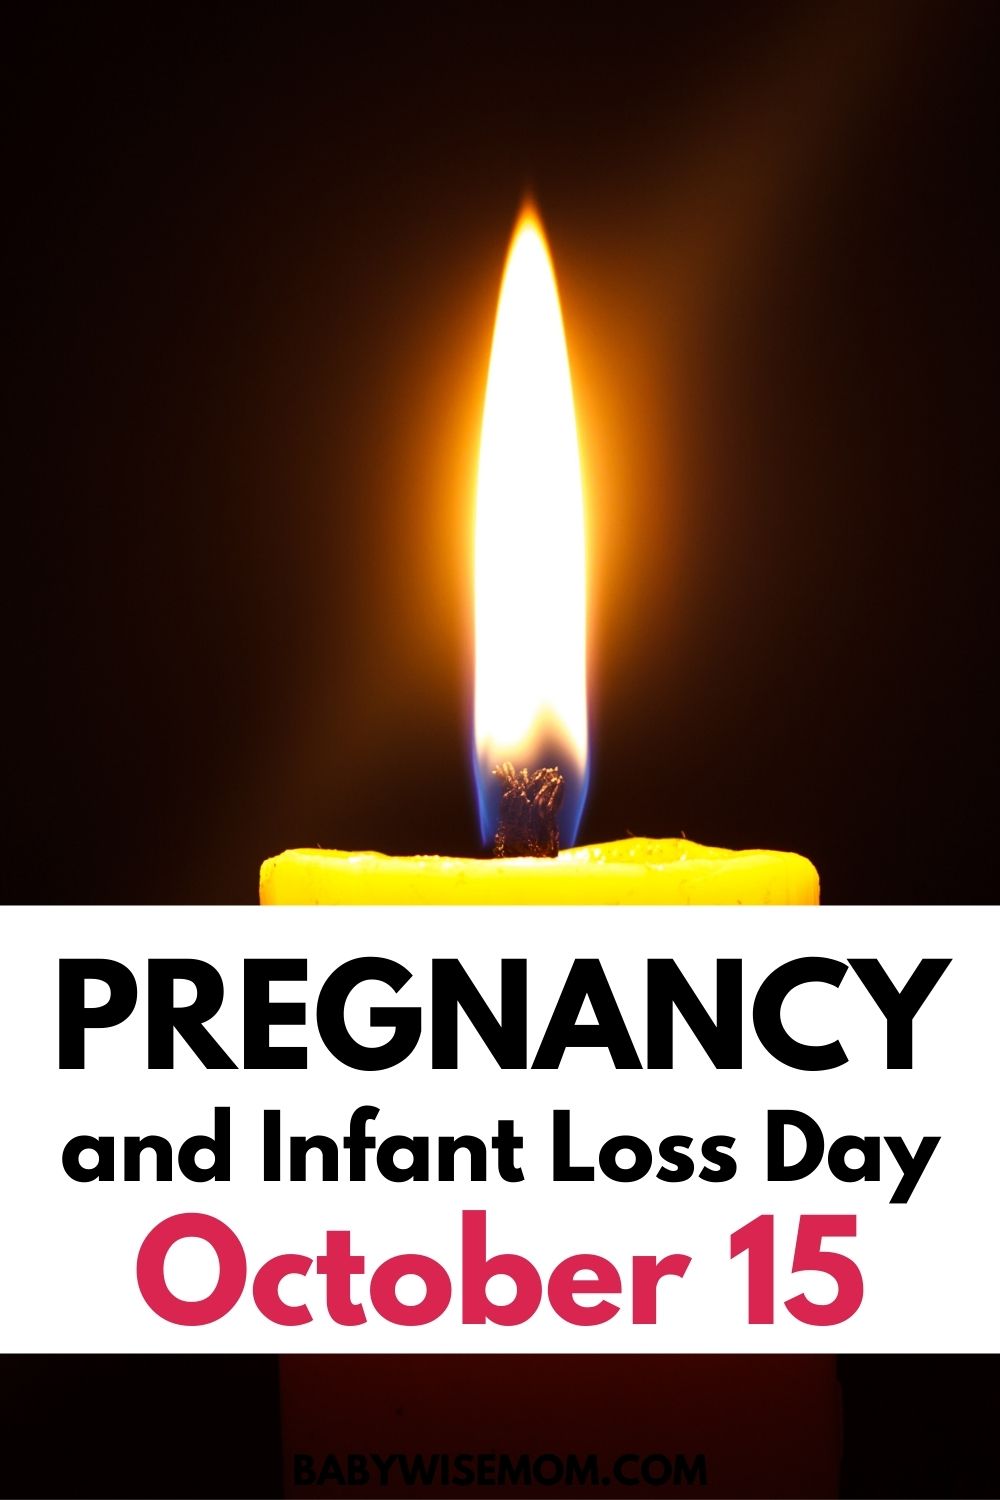 Pregnancy and infant loss day